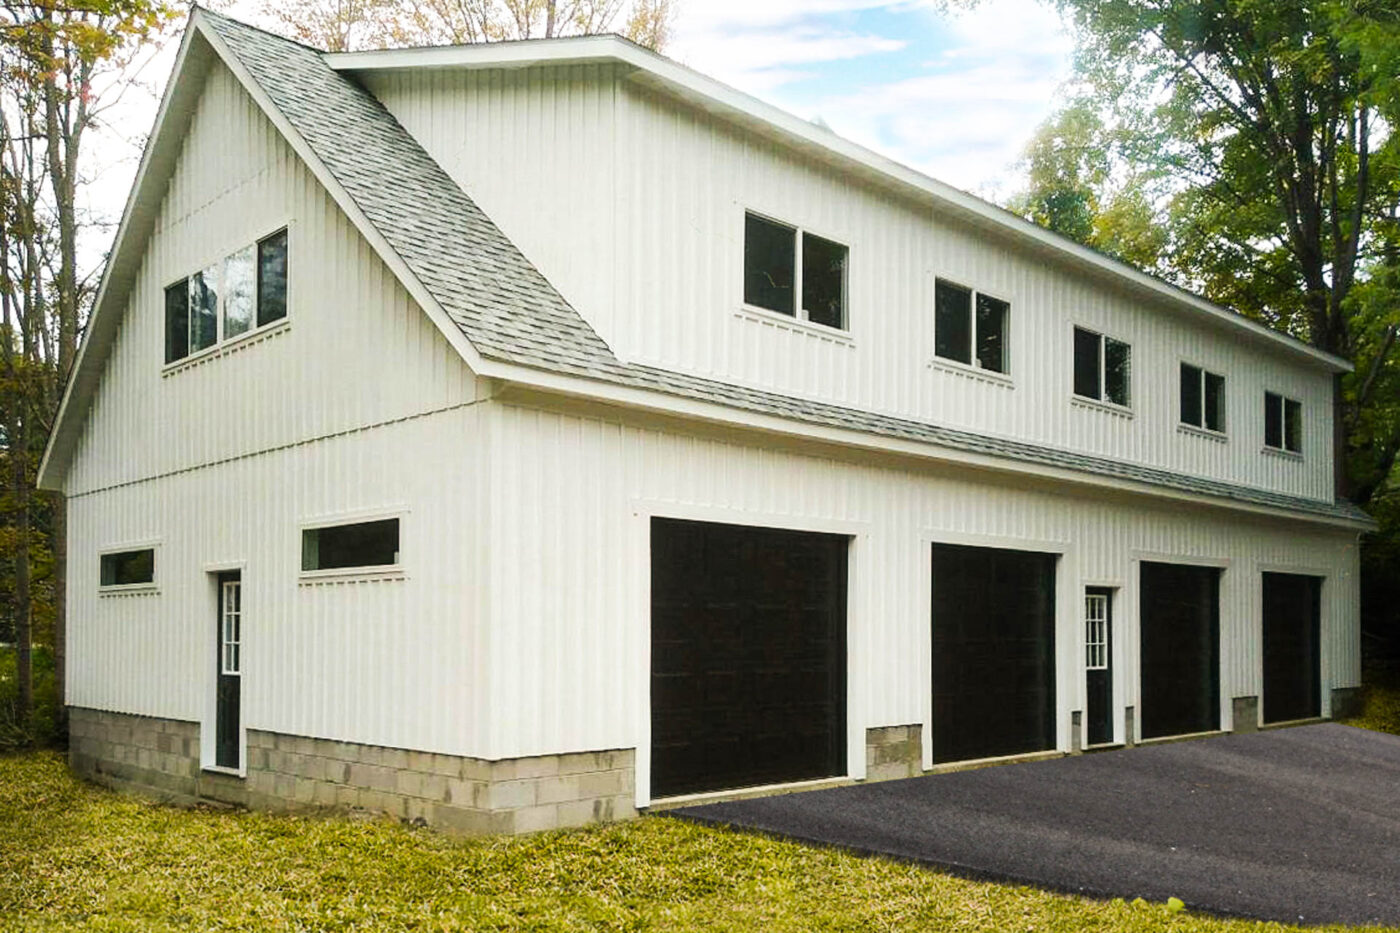 4 car garage for sale in NY 4